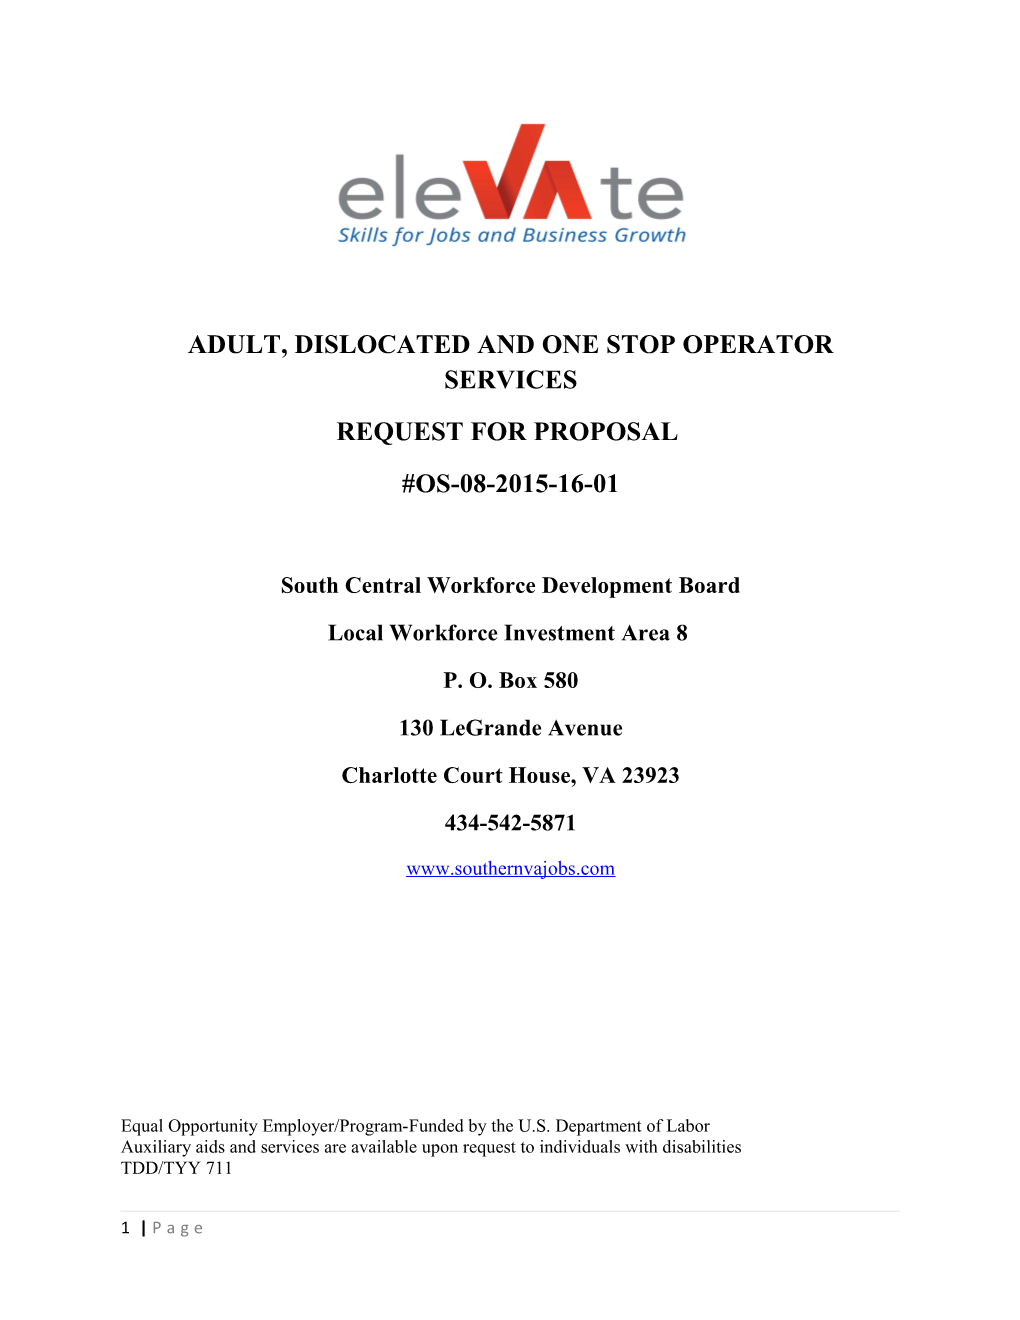 Adult, Dislocated and One Stop Operator Services